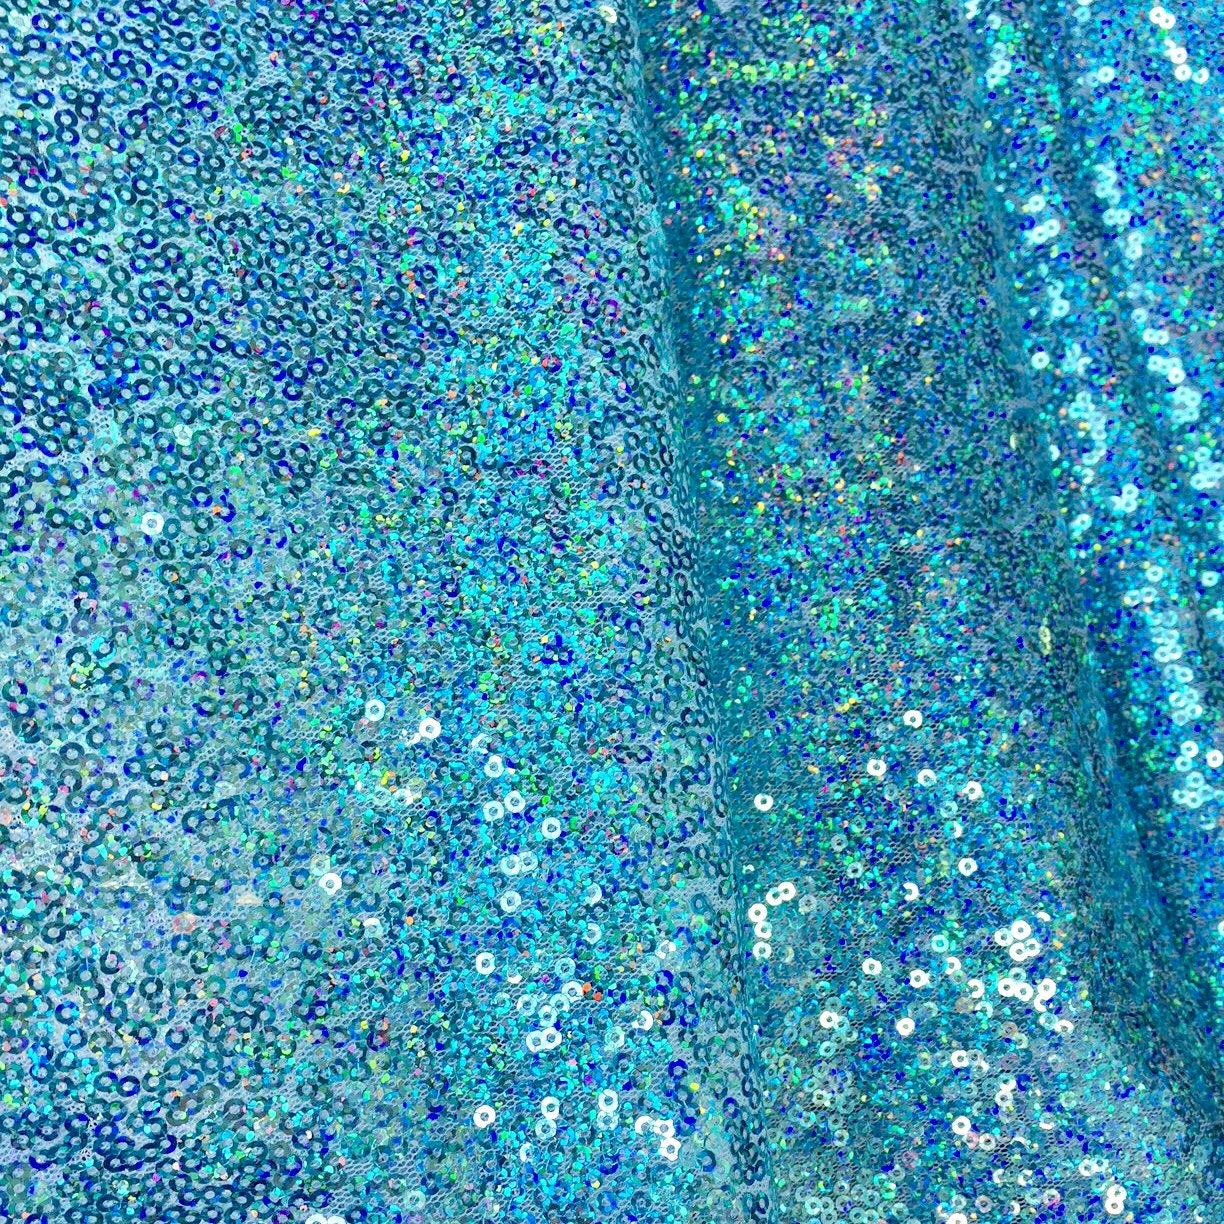 Sequins Macro Backgroundlarge Sequins In Blue And Pink Colorsfabric With  Sequins In Pastel Toneridescent Fabricscales Background Background With  Shiny Sequinstexture Scales Stock Photo - Download Image Now - iStock